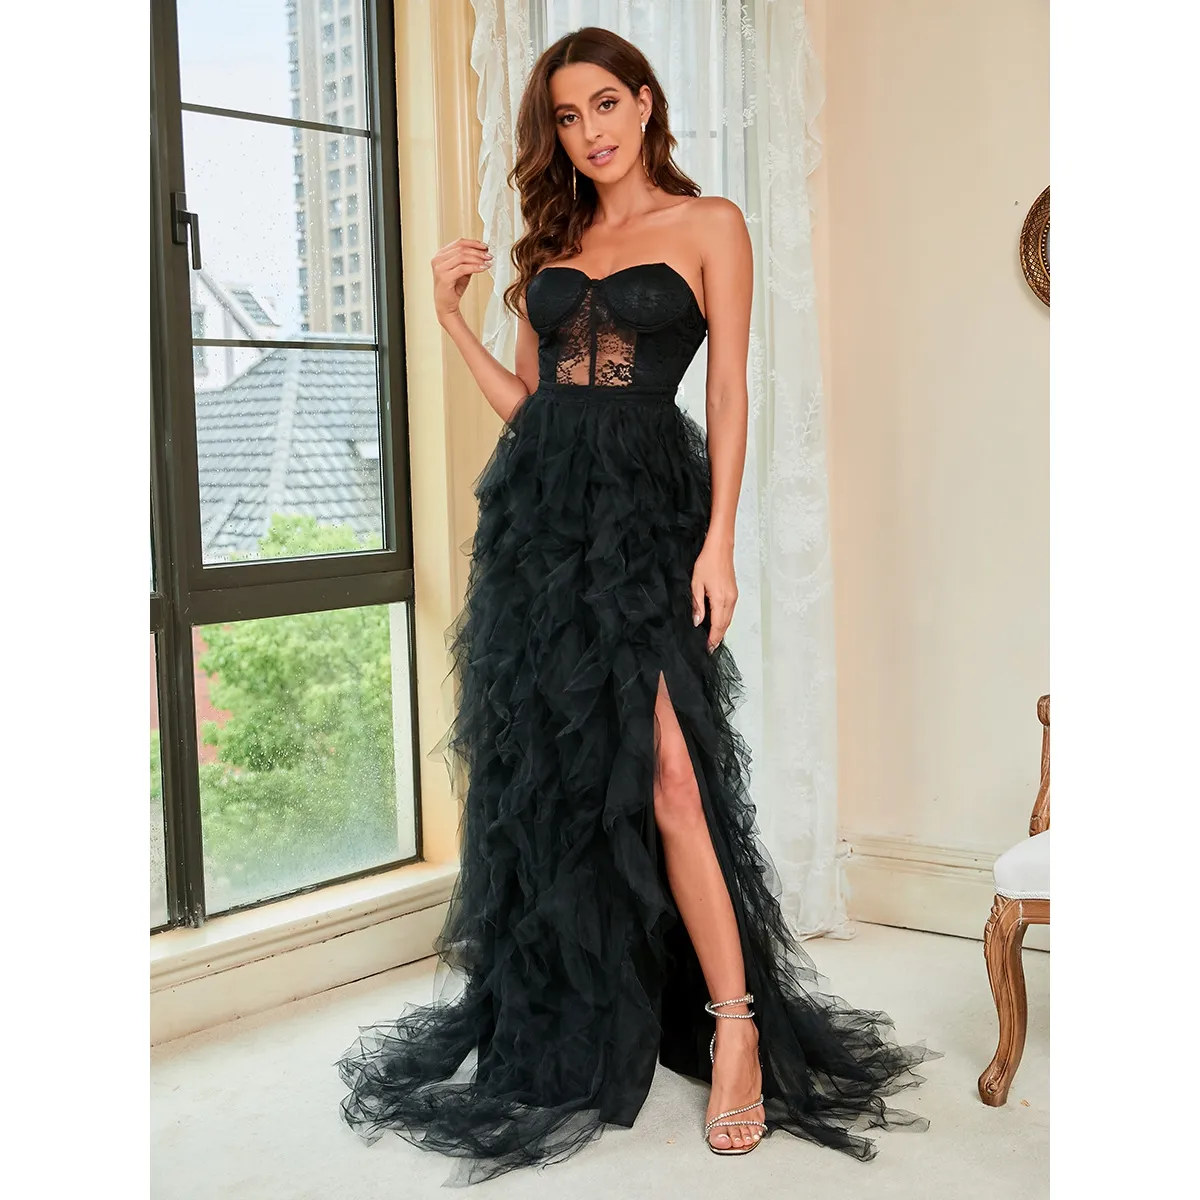 New Arrivals Large Size Lace Mesh Tube Top Elegant Maxi Evening Dress Sexy Party Wear Dress For Women